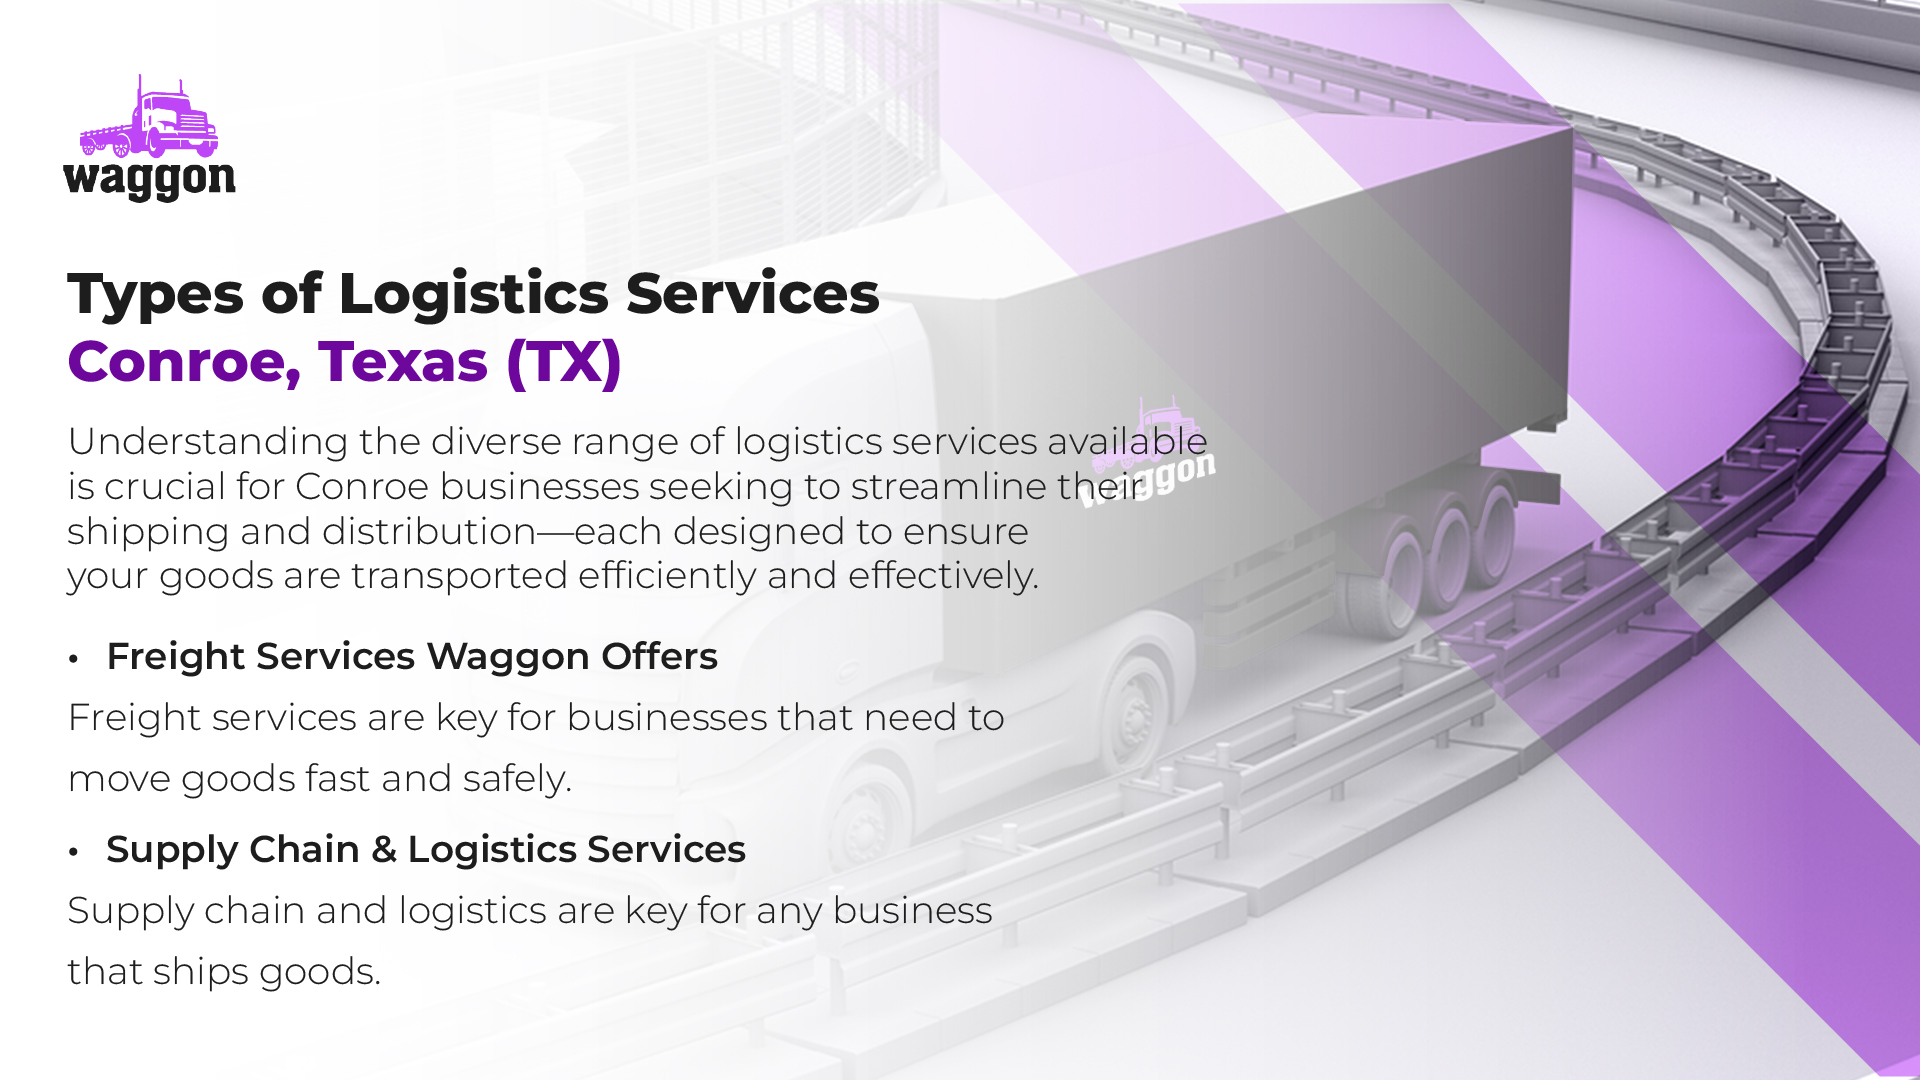 Types of Logistics Services in Conroe, Texas (TX)